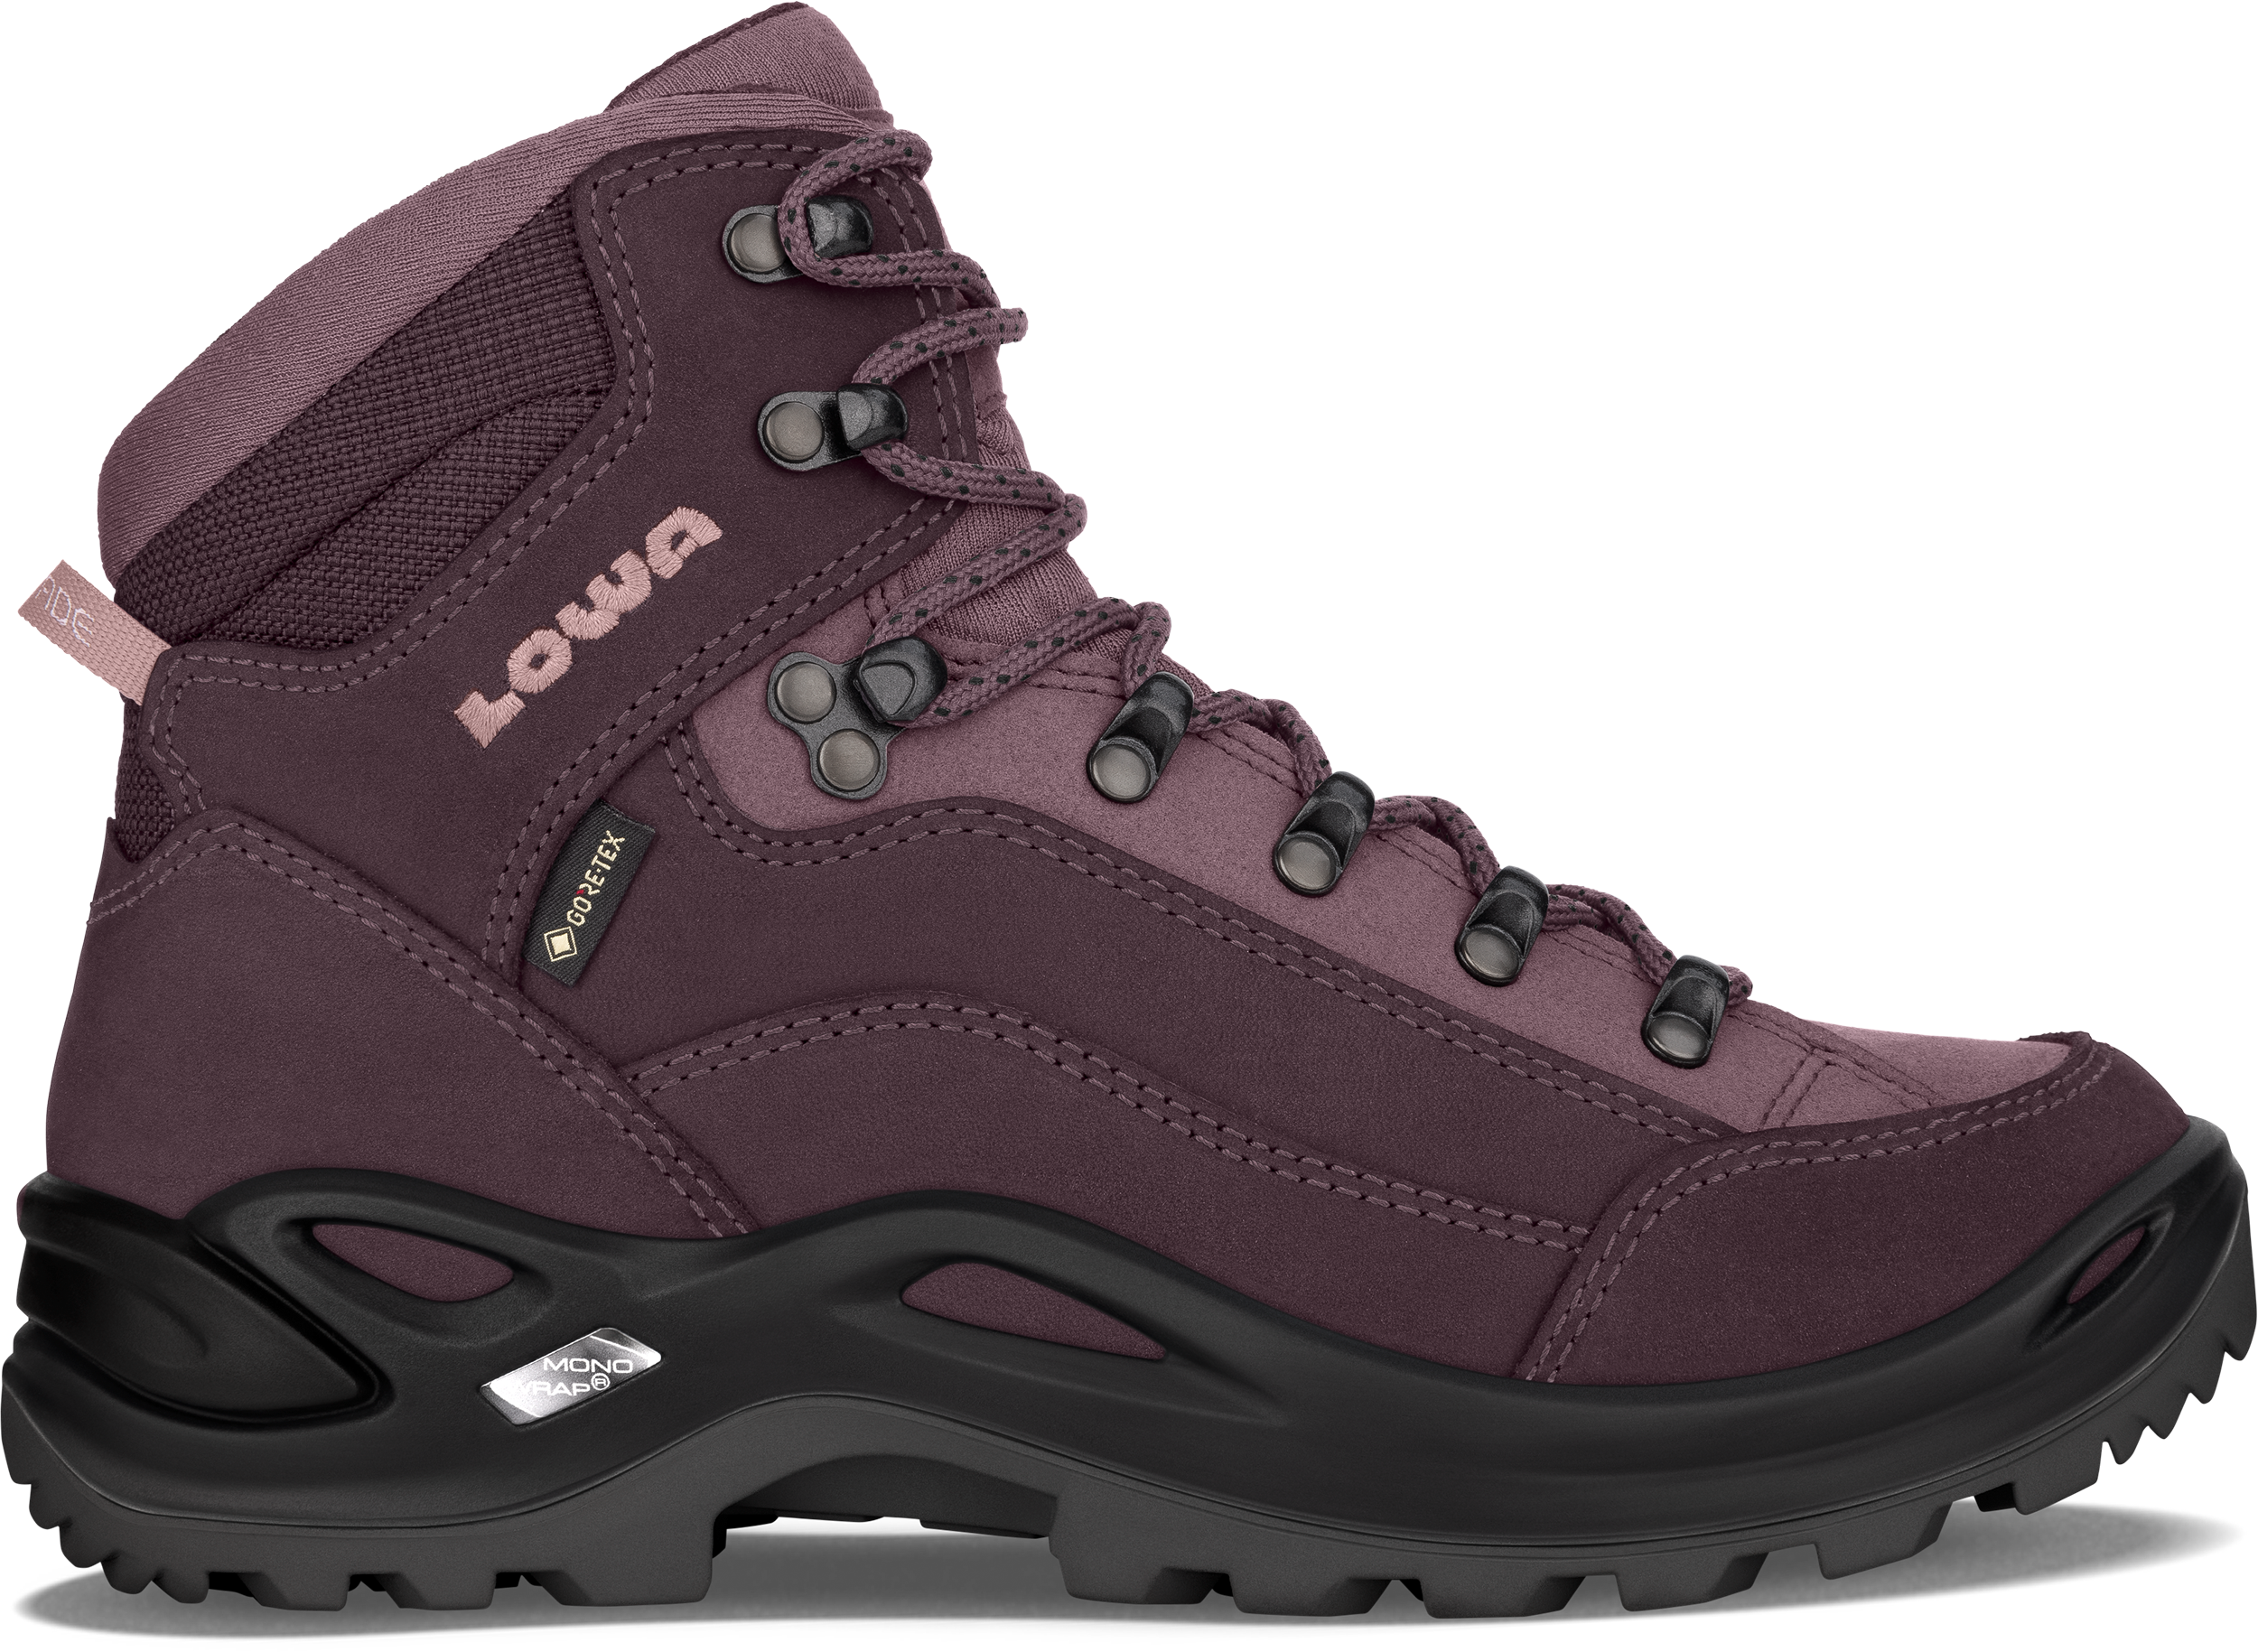 Onbeleefd Transparant expeditie RENEGADE GTX MID Ws: ALL TERRAIN CLASSIC shoes for women | LOWA INT